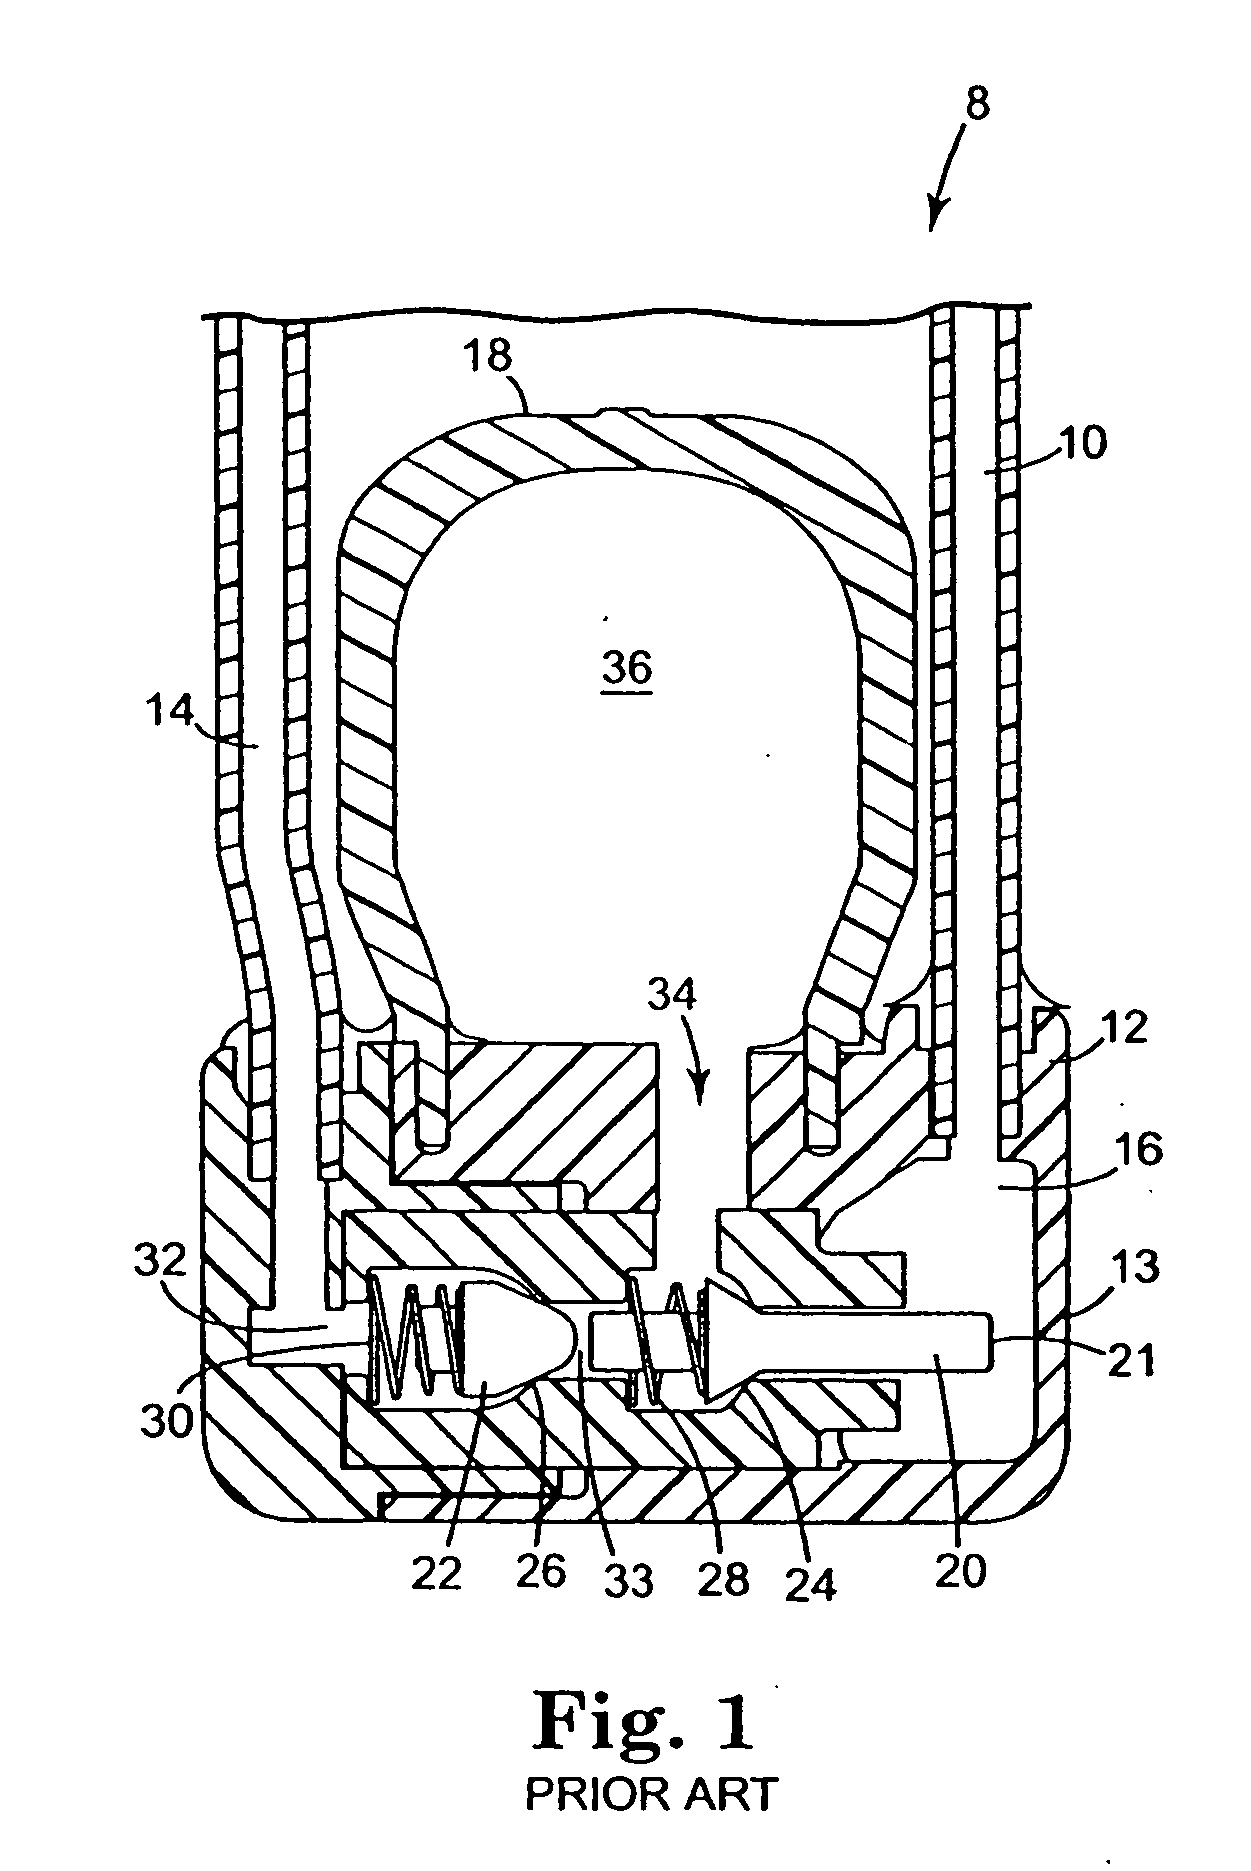 Method of preventing inadvertent inflation of an inflatable prosthesis